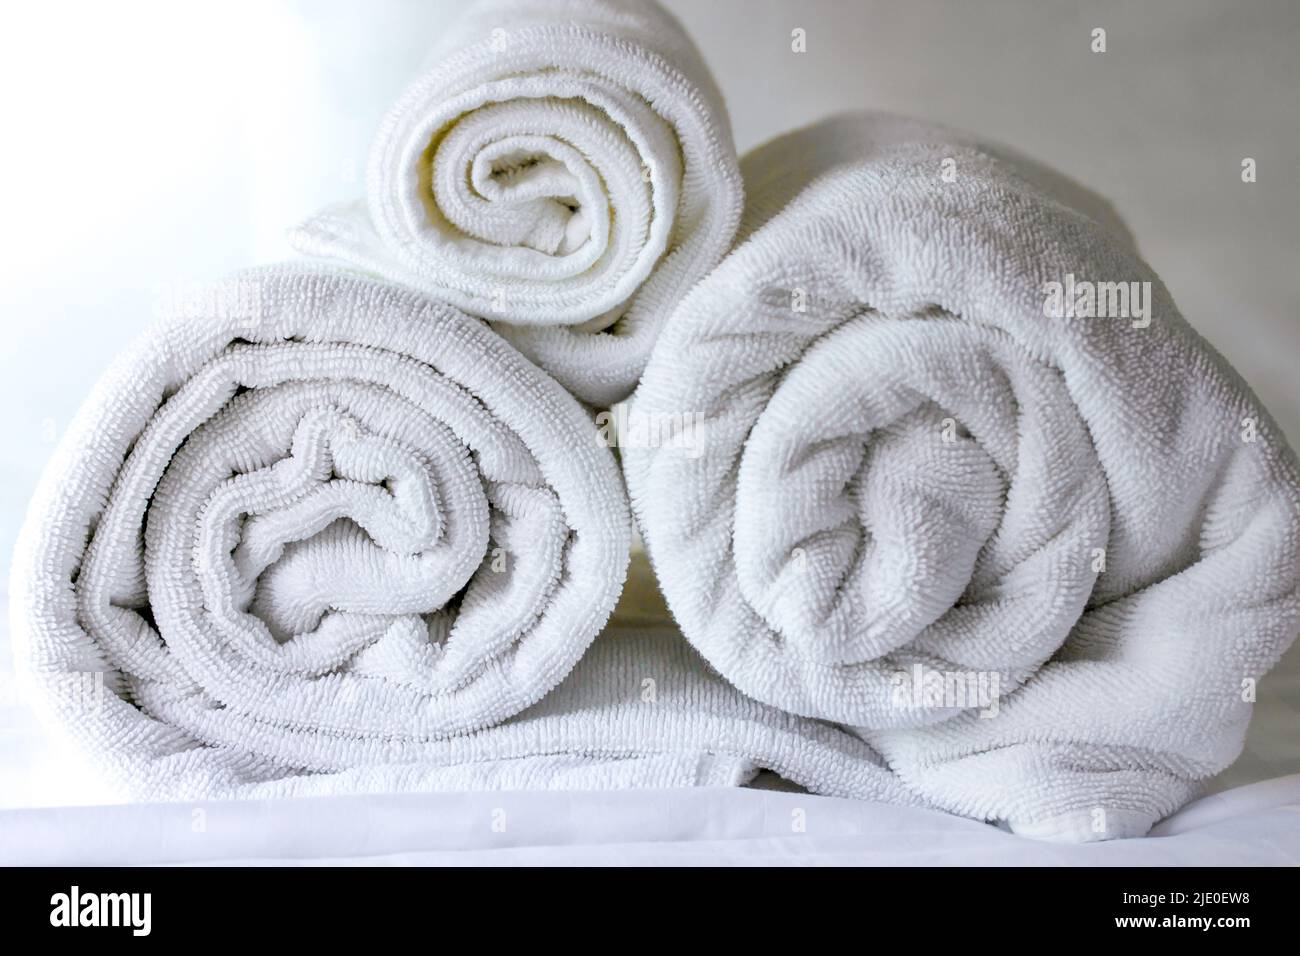 https://c8.alamy.com/comp/2JE0EW8/white-towel-roll-on-bed-in-hotelclose-up-2JE0EW8.jpg